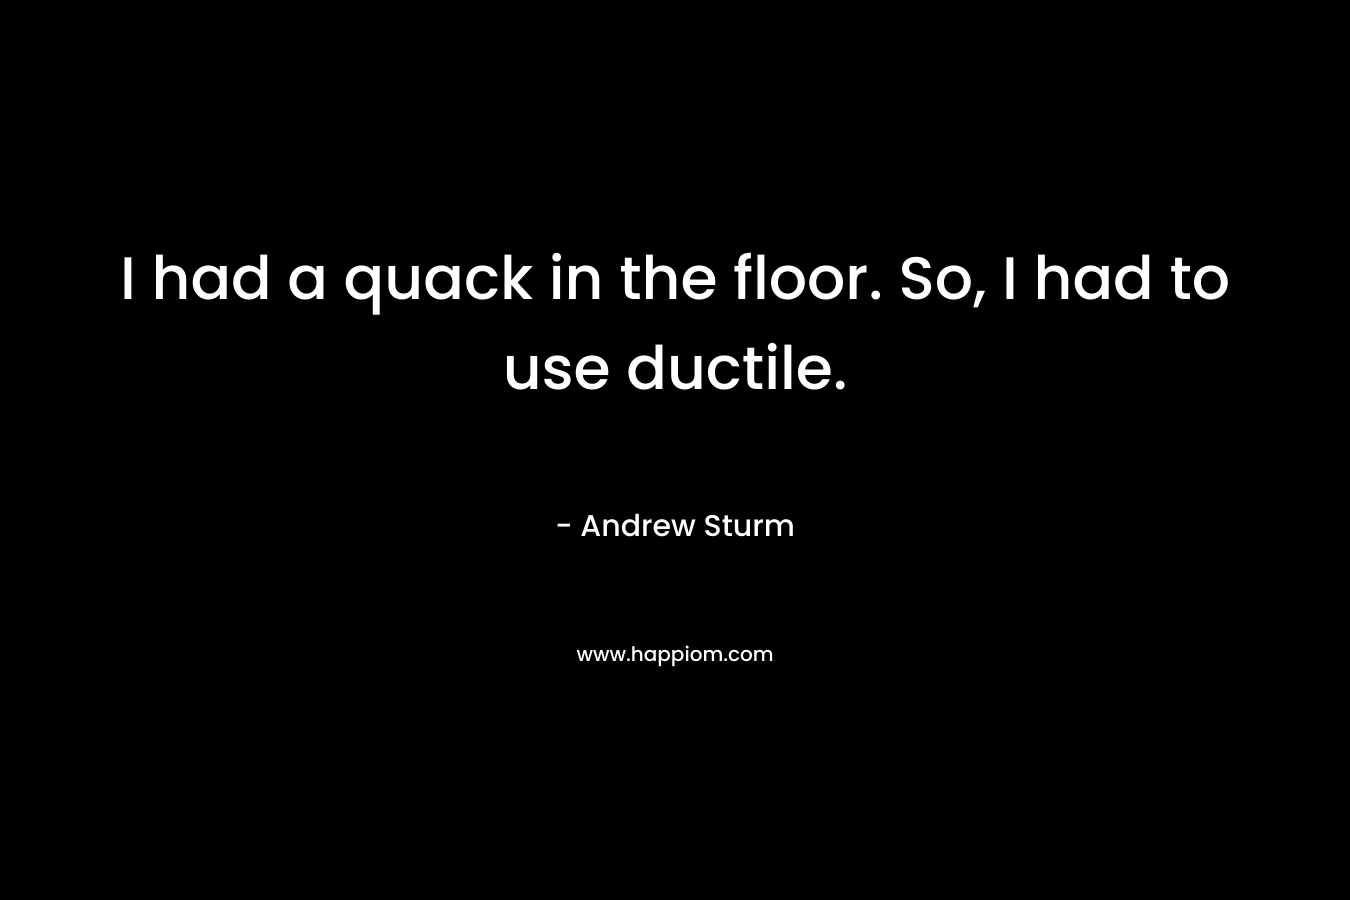 I had a quack in the floor. So, I had to use ductile.